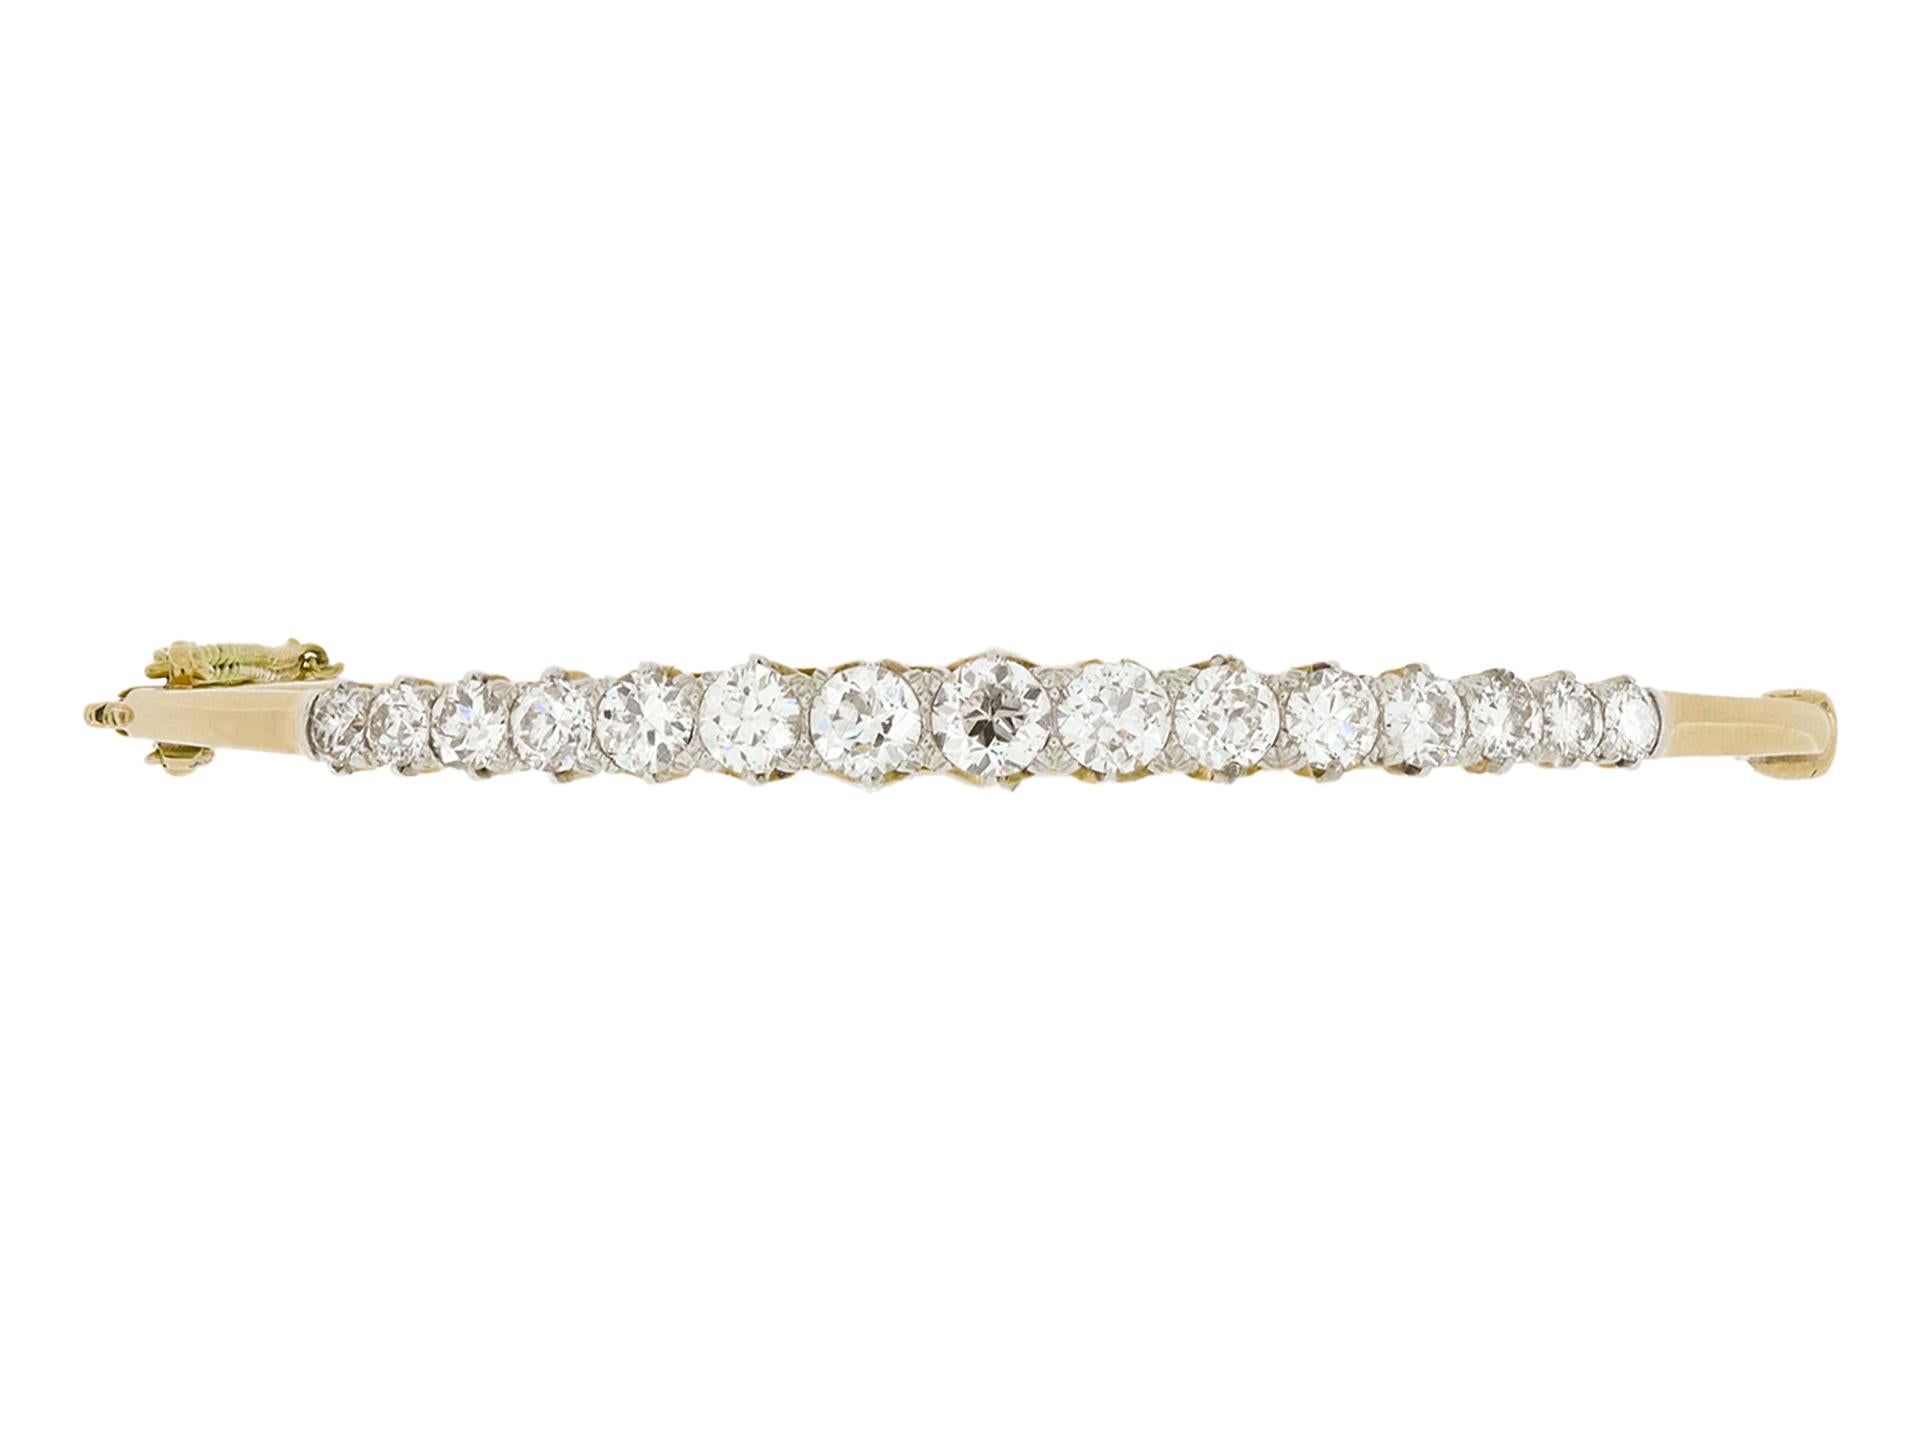 Edwardian diamond hinge bangle. Set with fifteen round old cut diamonds in open back claw and grain settings with a combined approximate weight of 2.60 carats, to an open elegant graduating design featuring curving claws, an intricate openwork